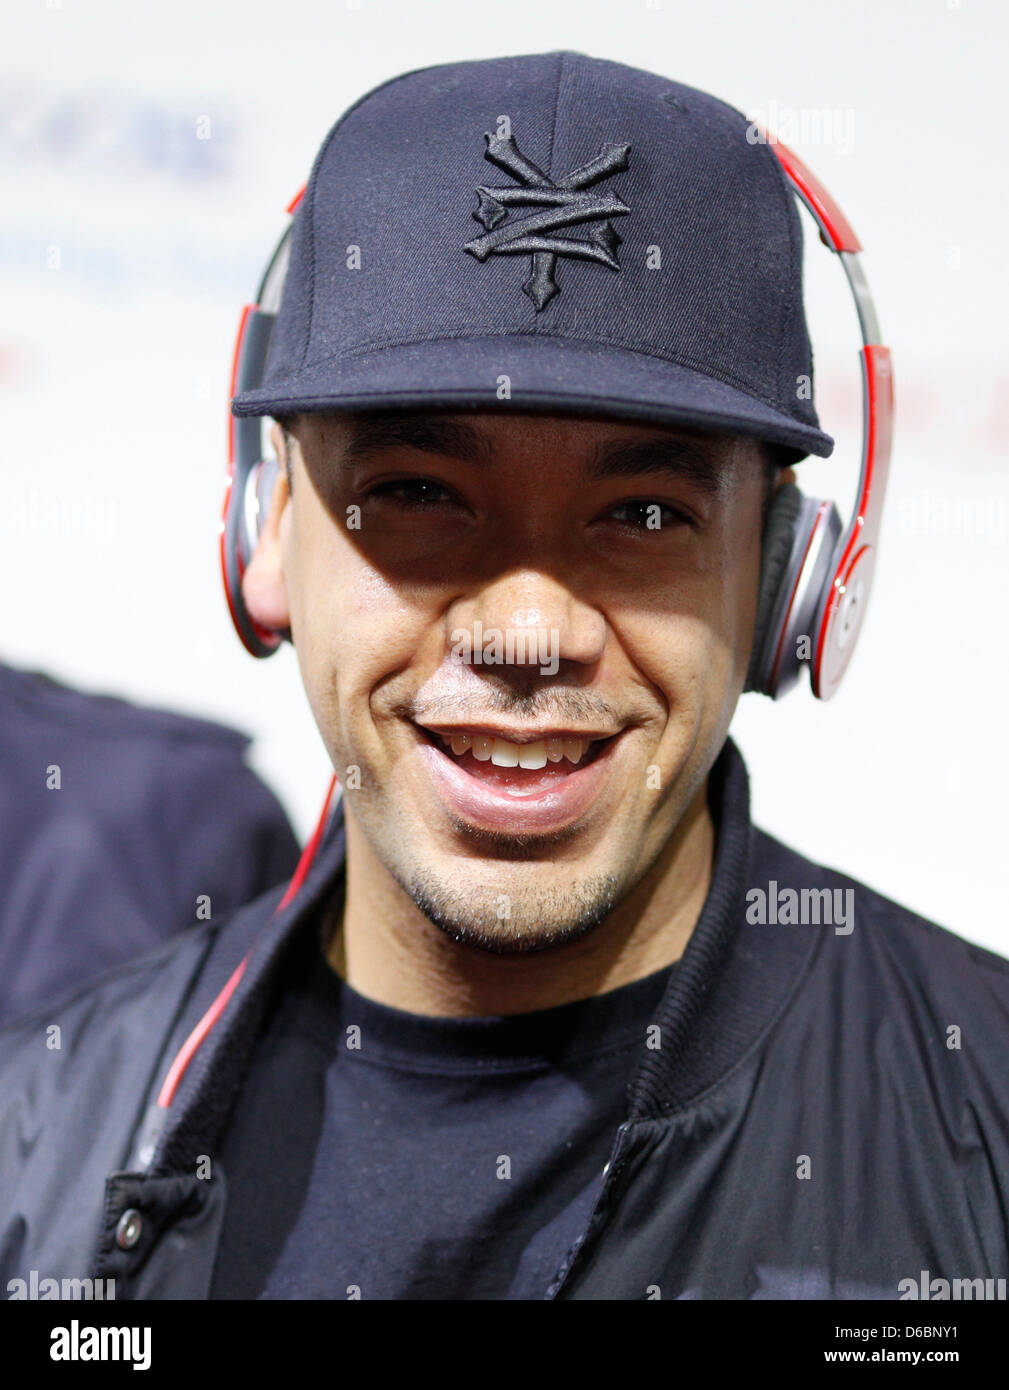 Rapper Larsito poses for pictures on the red carpet outside the nightclub 'Spindler und Klatt' in Berlin, Germany, 04 September 2012. The 'Beats Berlin Party' was sponsored by the 'Beats by Dr. Dre' headphone brand and attracted many celebrities. Photo: Florian Schuh Stock Photo